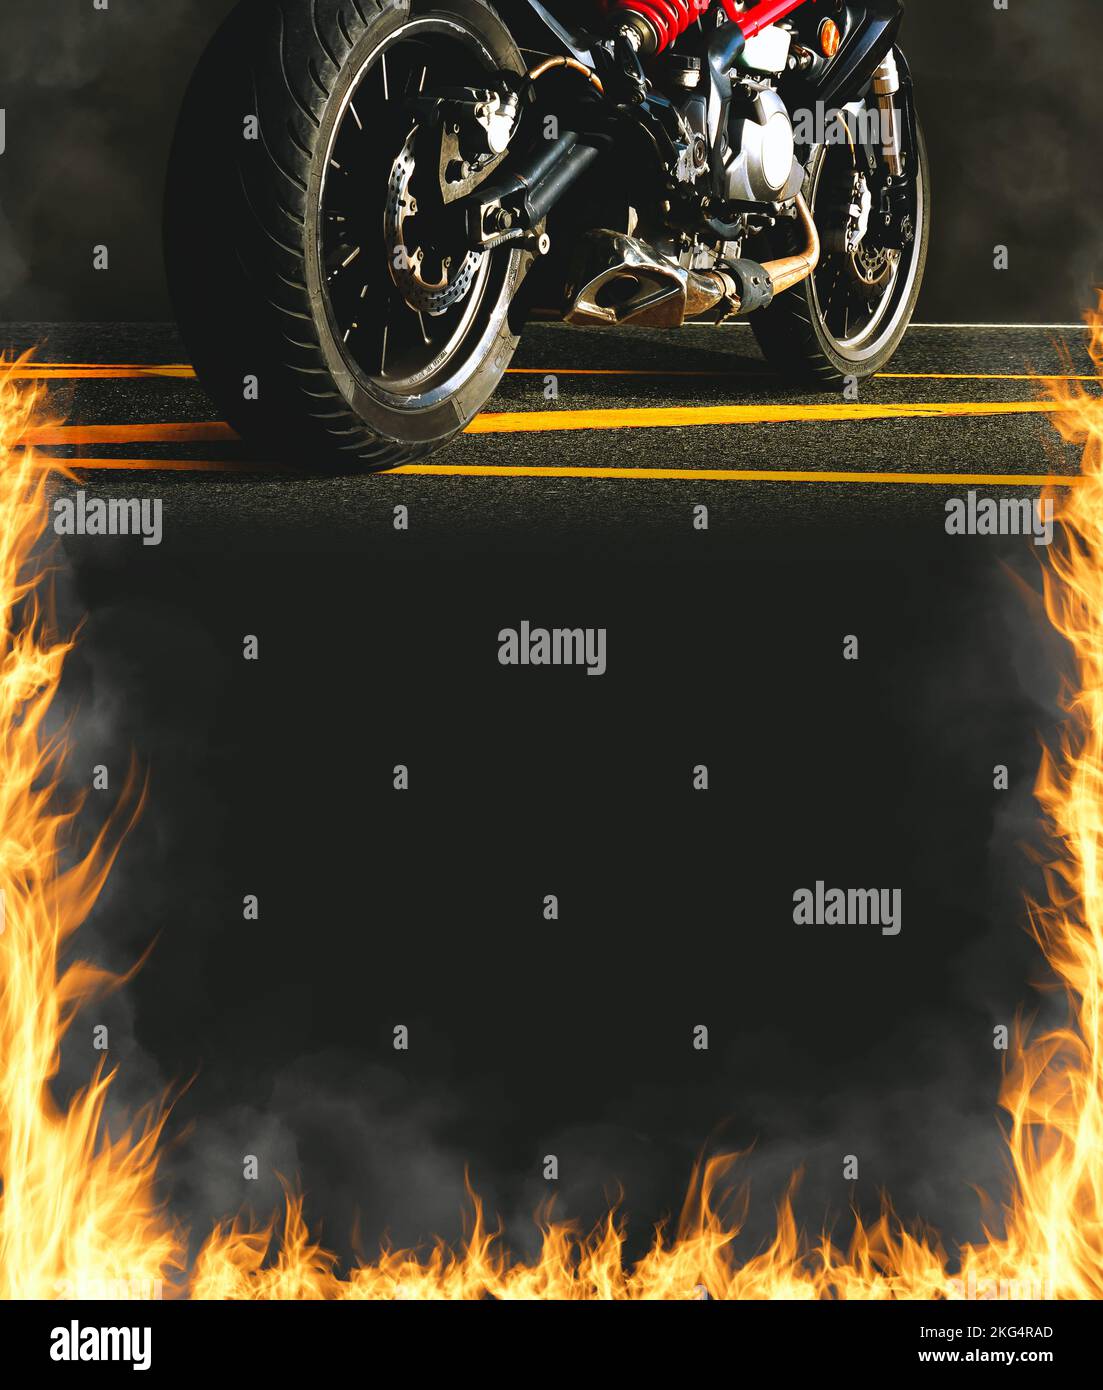 Motorbike and fire flames on vertical black frame background with copy space Stock Photo